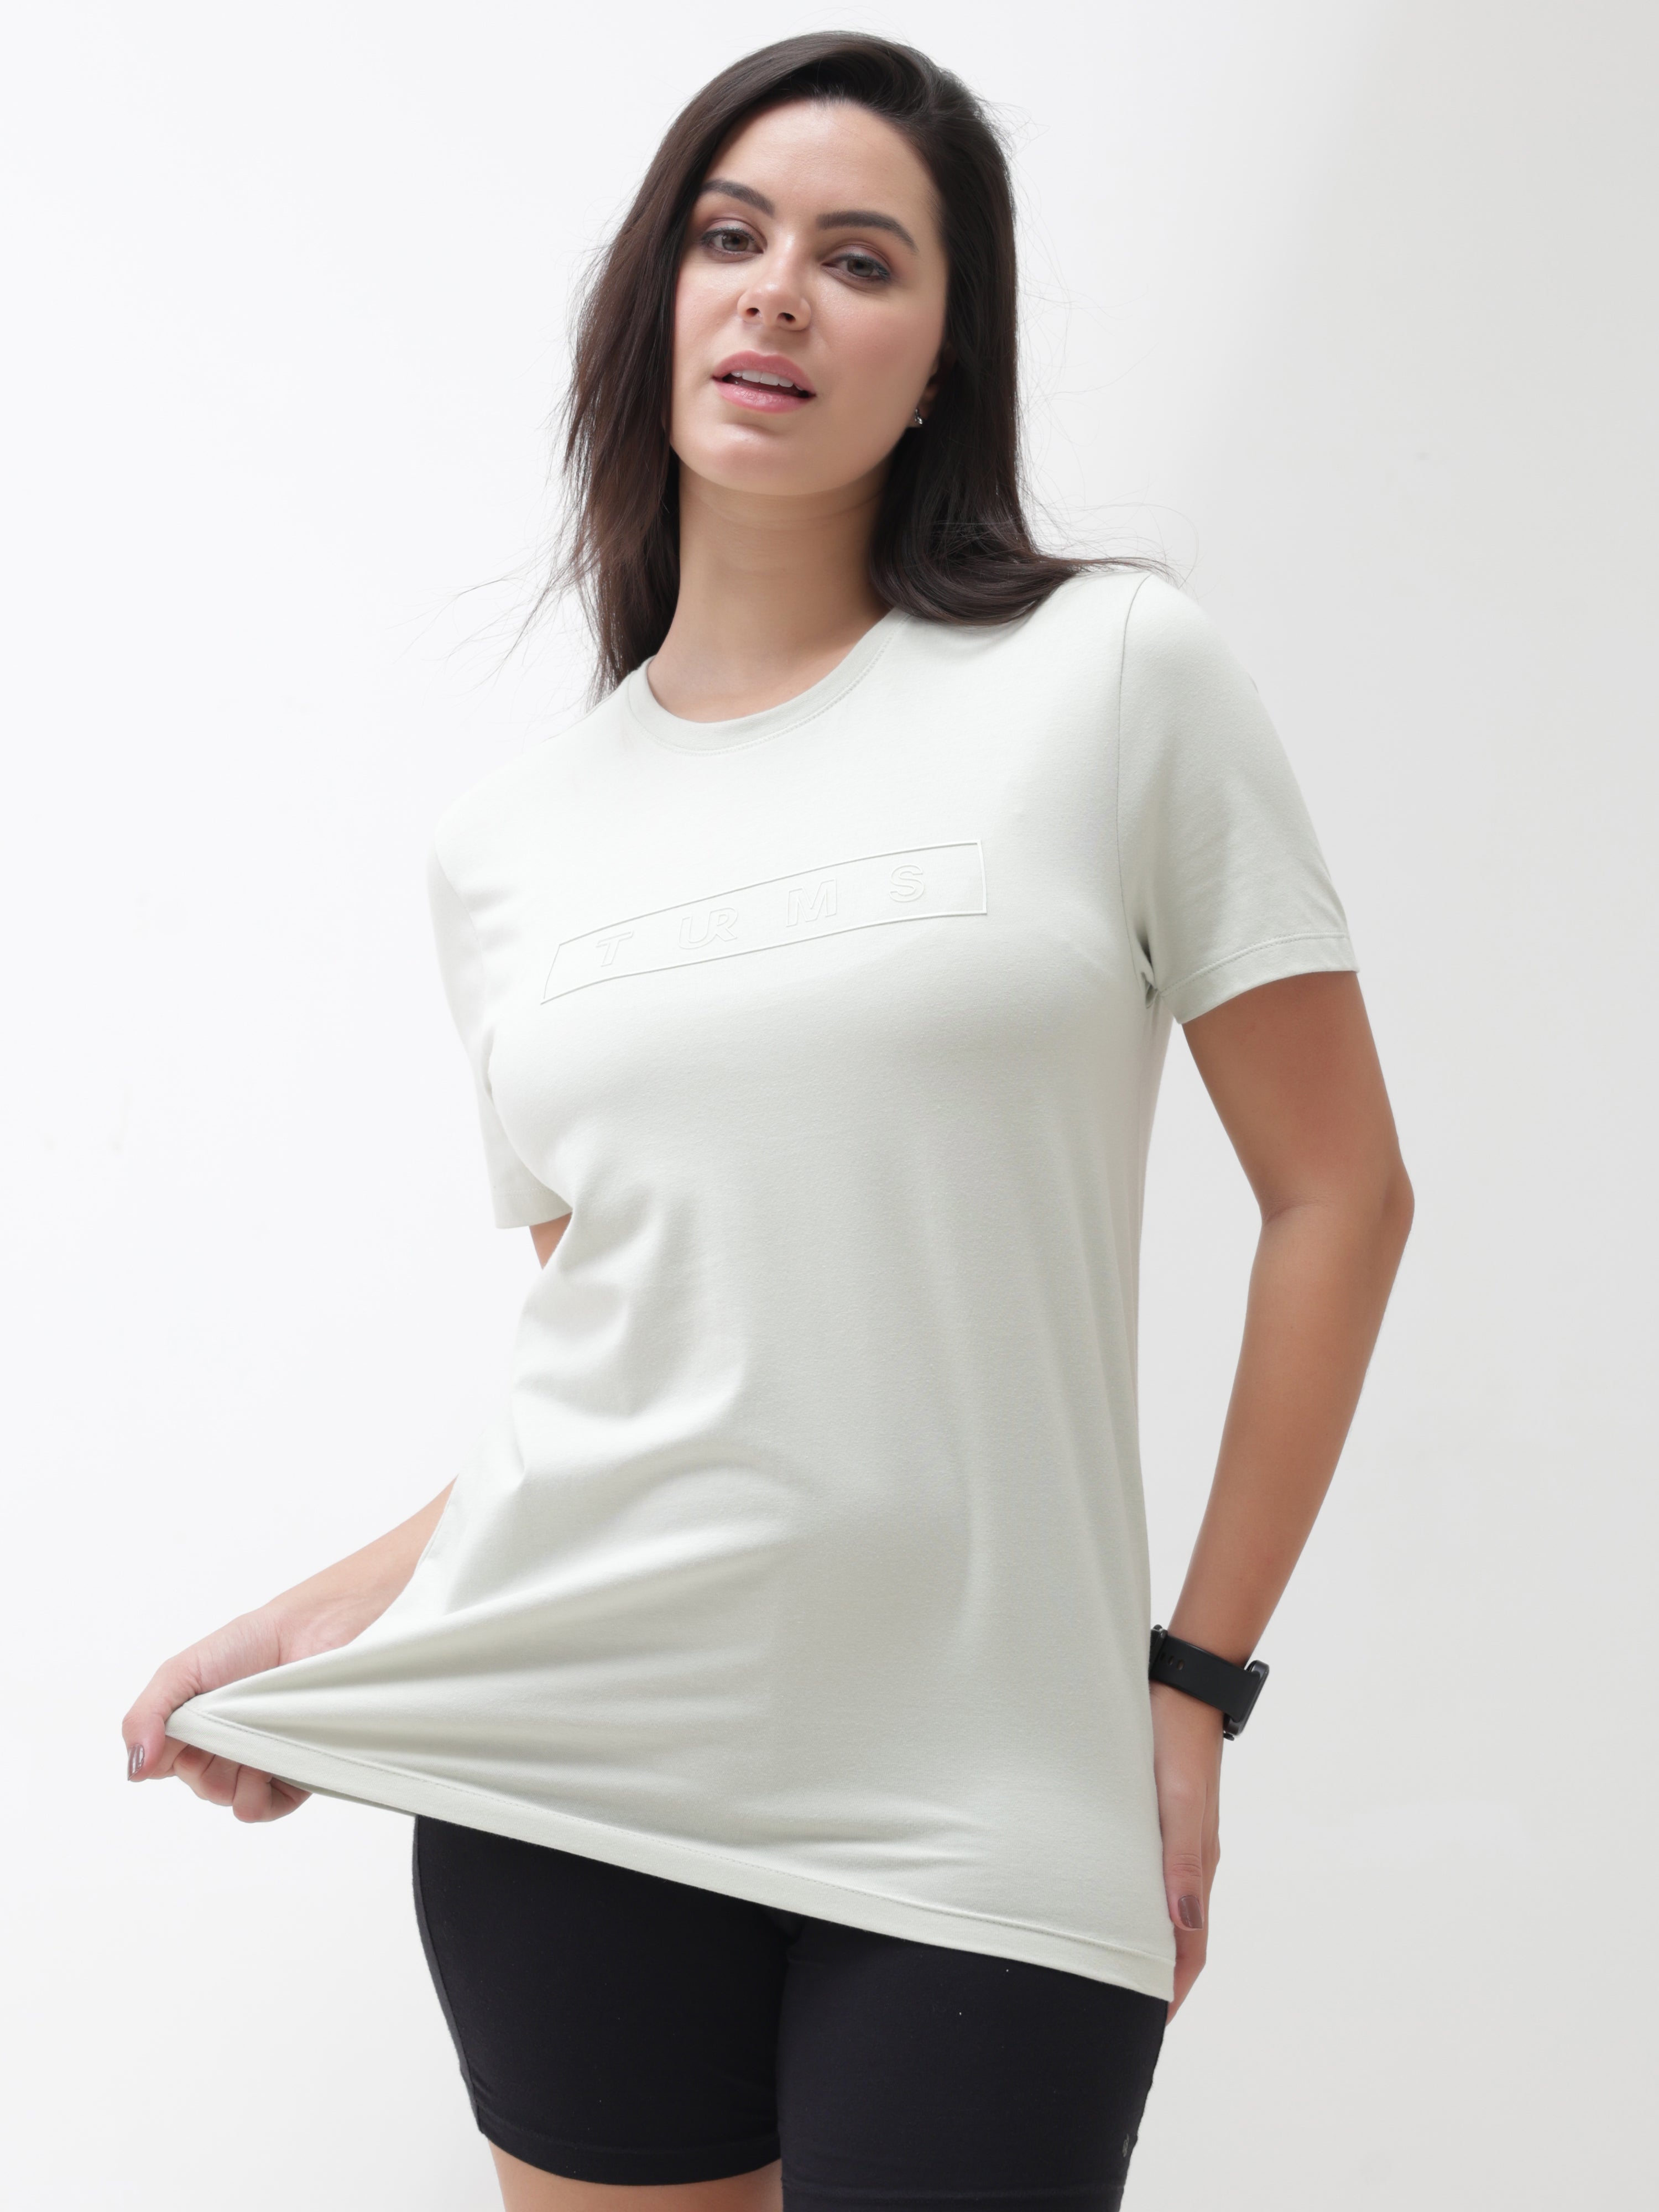 Woman wearing Lime Enigma round-neck Turms T-shirt, showcasing its stretchable and tailored fit, anti-stain, and anti-odor intelligent apparel.